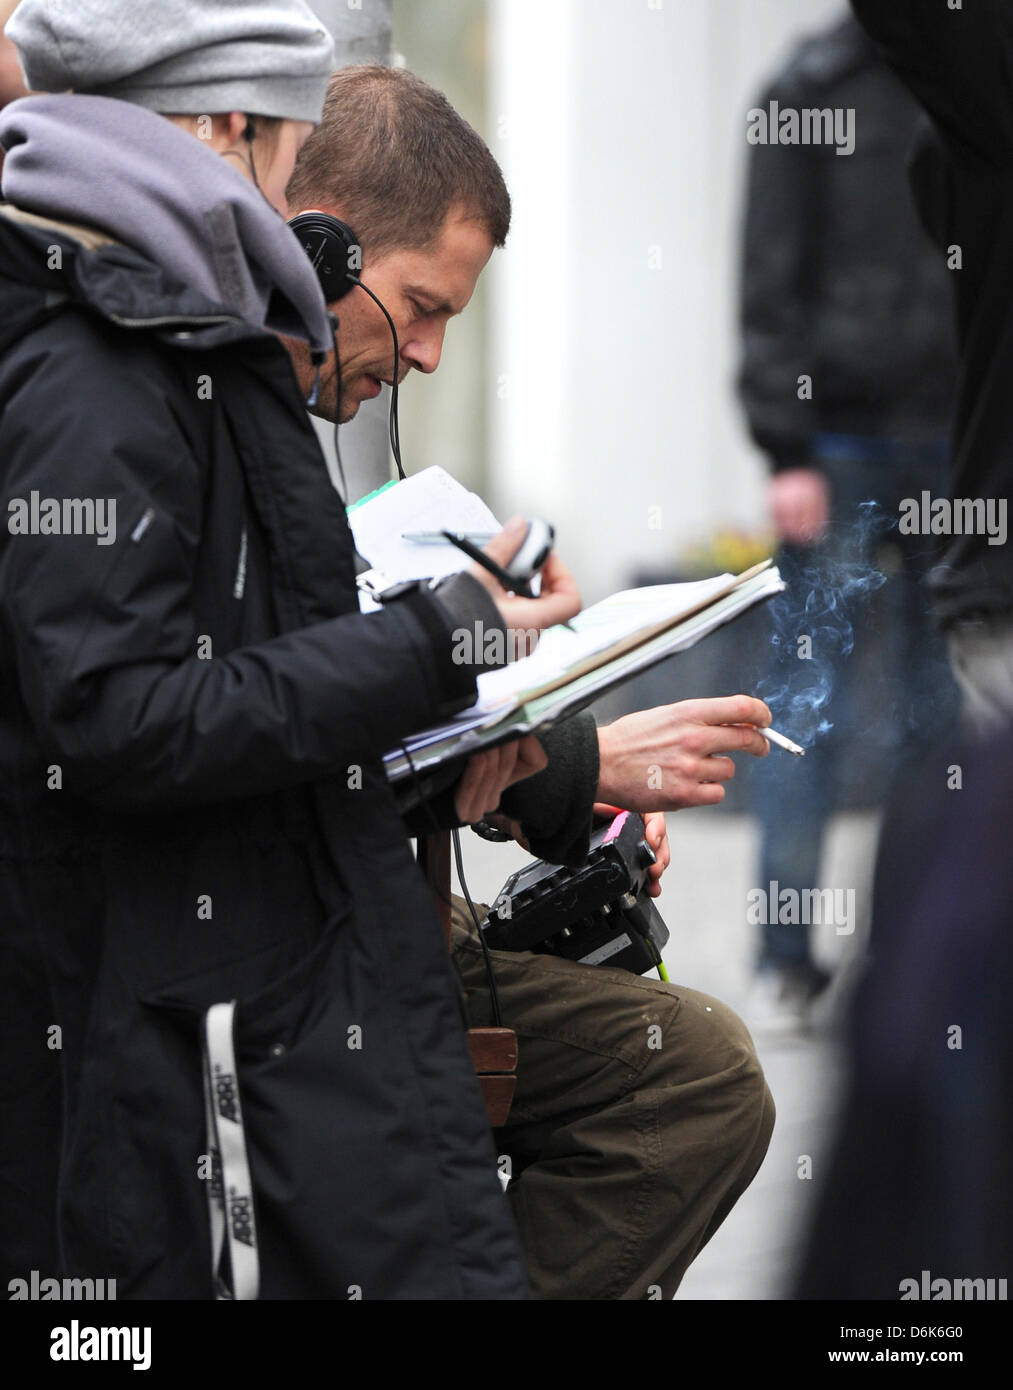 Til Schweiger directs the filming of the movie 'Schutzengel' (protective angel) at Friedrichstraße in Berlin, Germany, 03 April 2012. The action thriller by actor and director Til Schweiger is being filmed in and around Berlin and will come to German cinemas on 27 September 2012. Photo: Matthias Balk Stock Photo